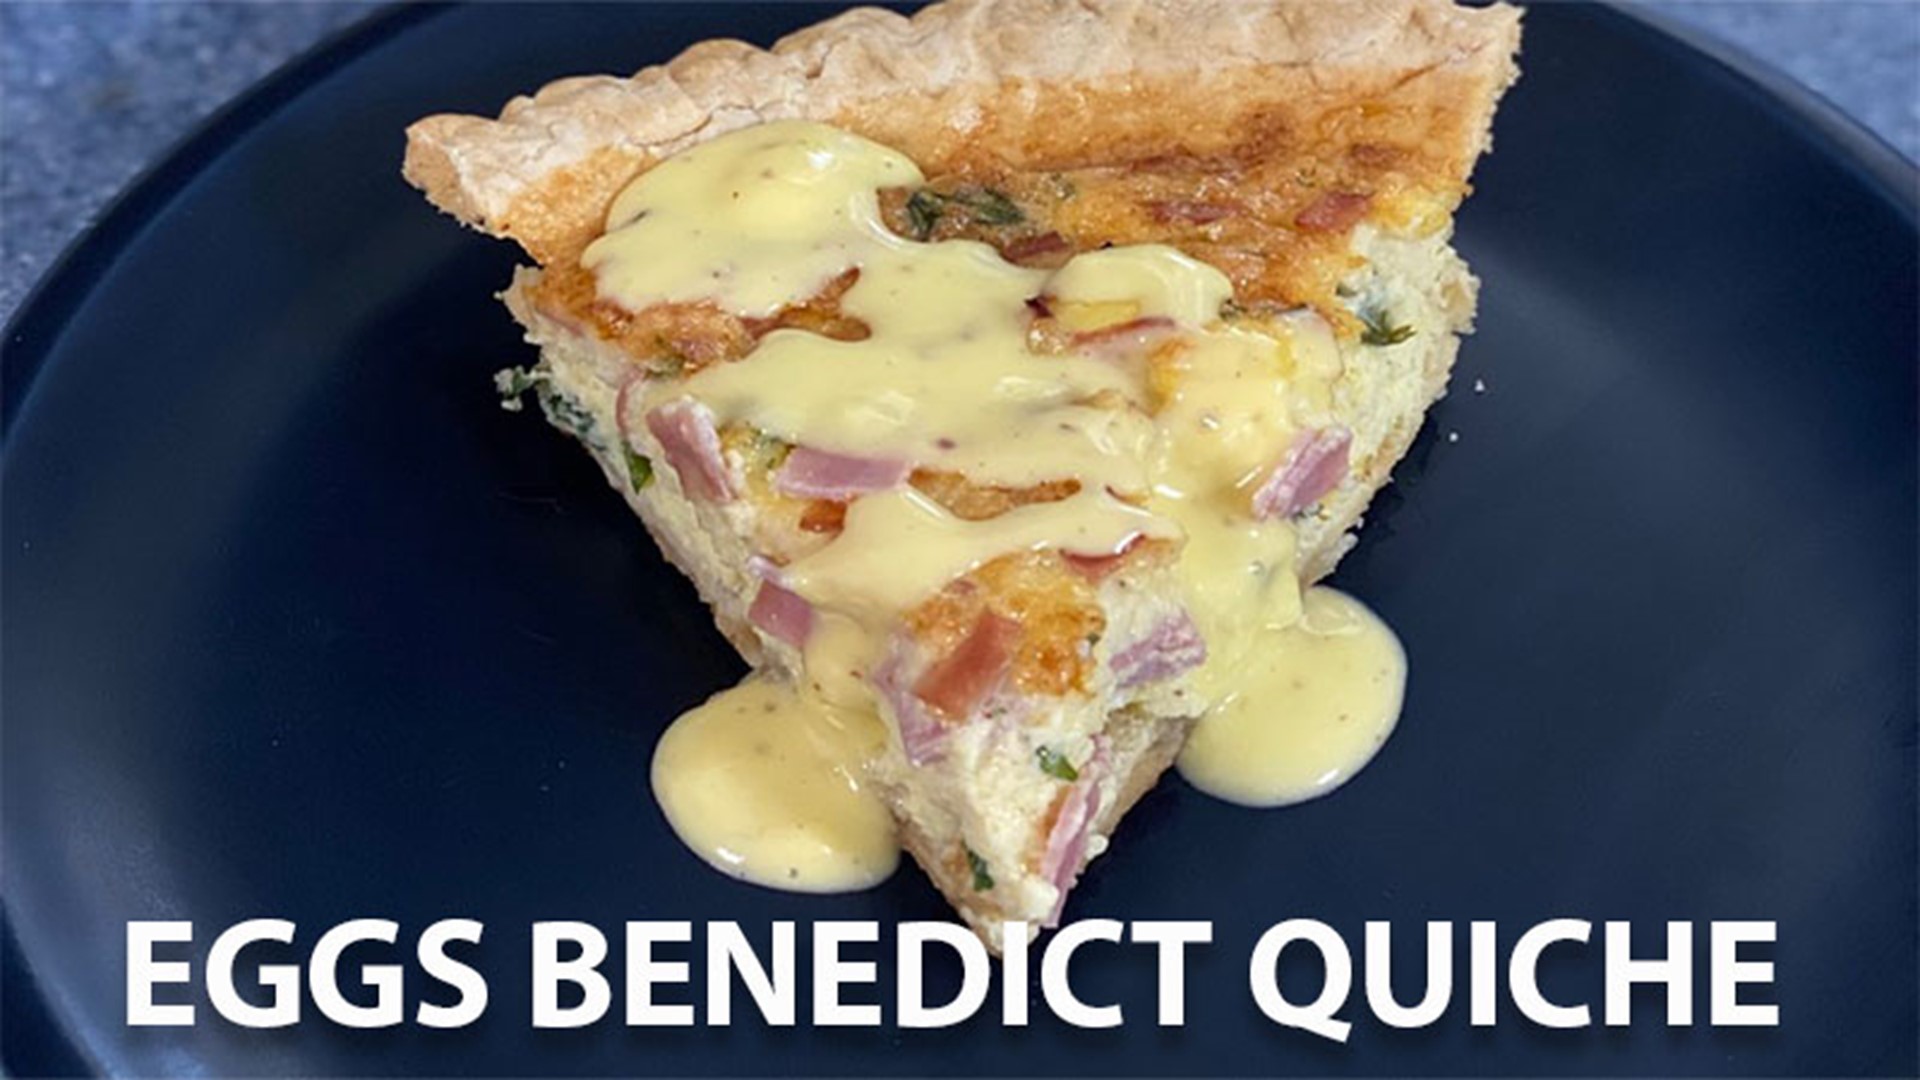 Chef Kevin Belton is utilizing some of those eggs you got for Easter to make up an Eggs Benedict Quiche.